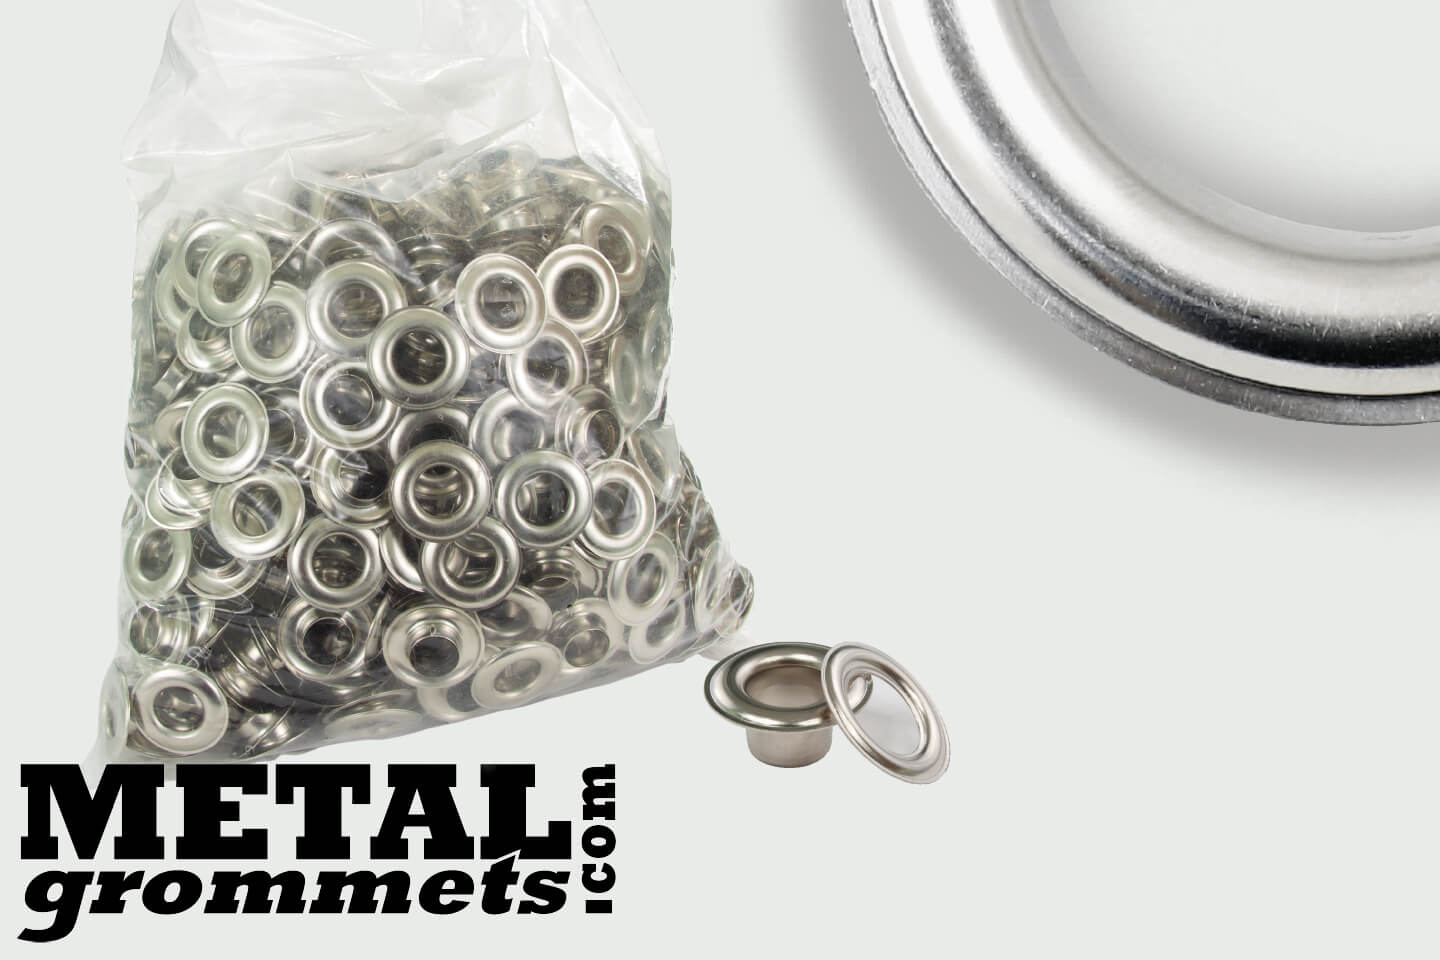 #3 Long-Neck (7/16 - Hole Size) Nickel Plated Grommets & Washers